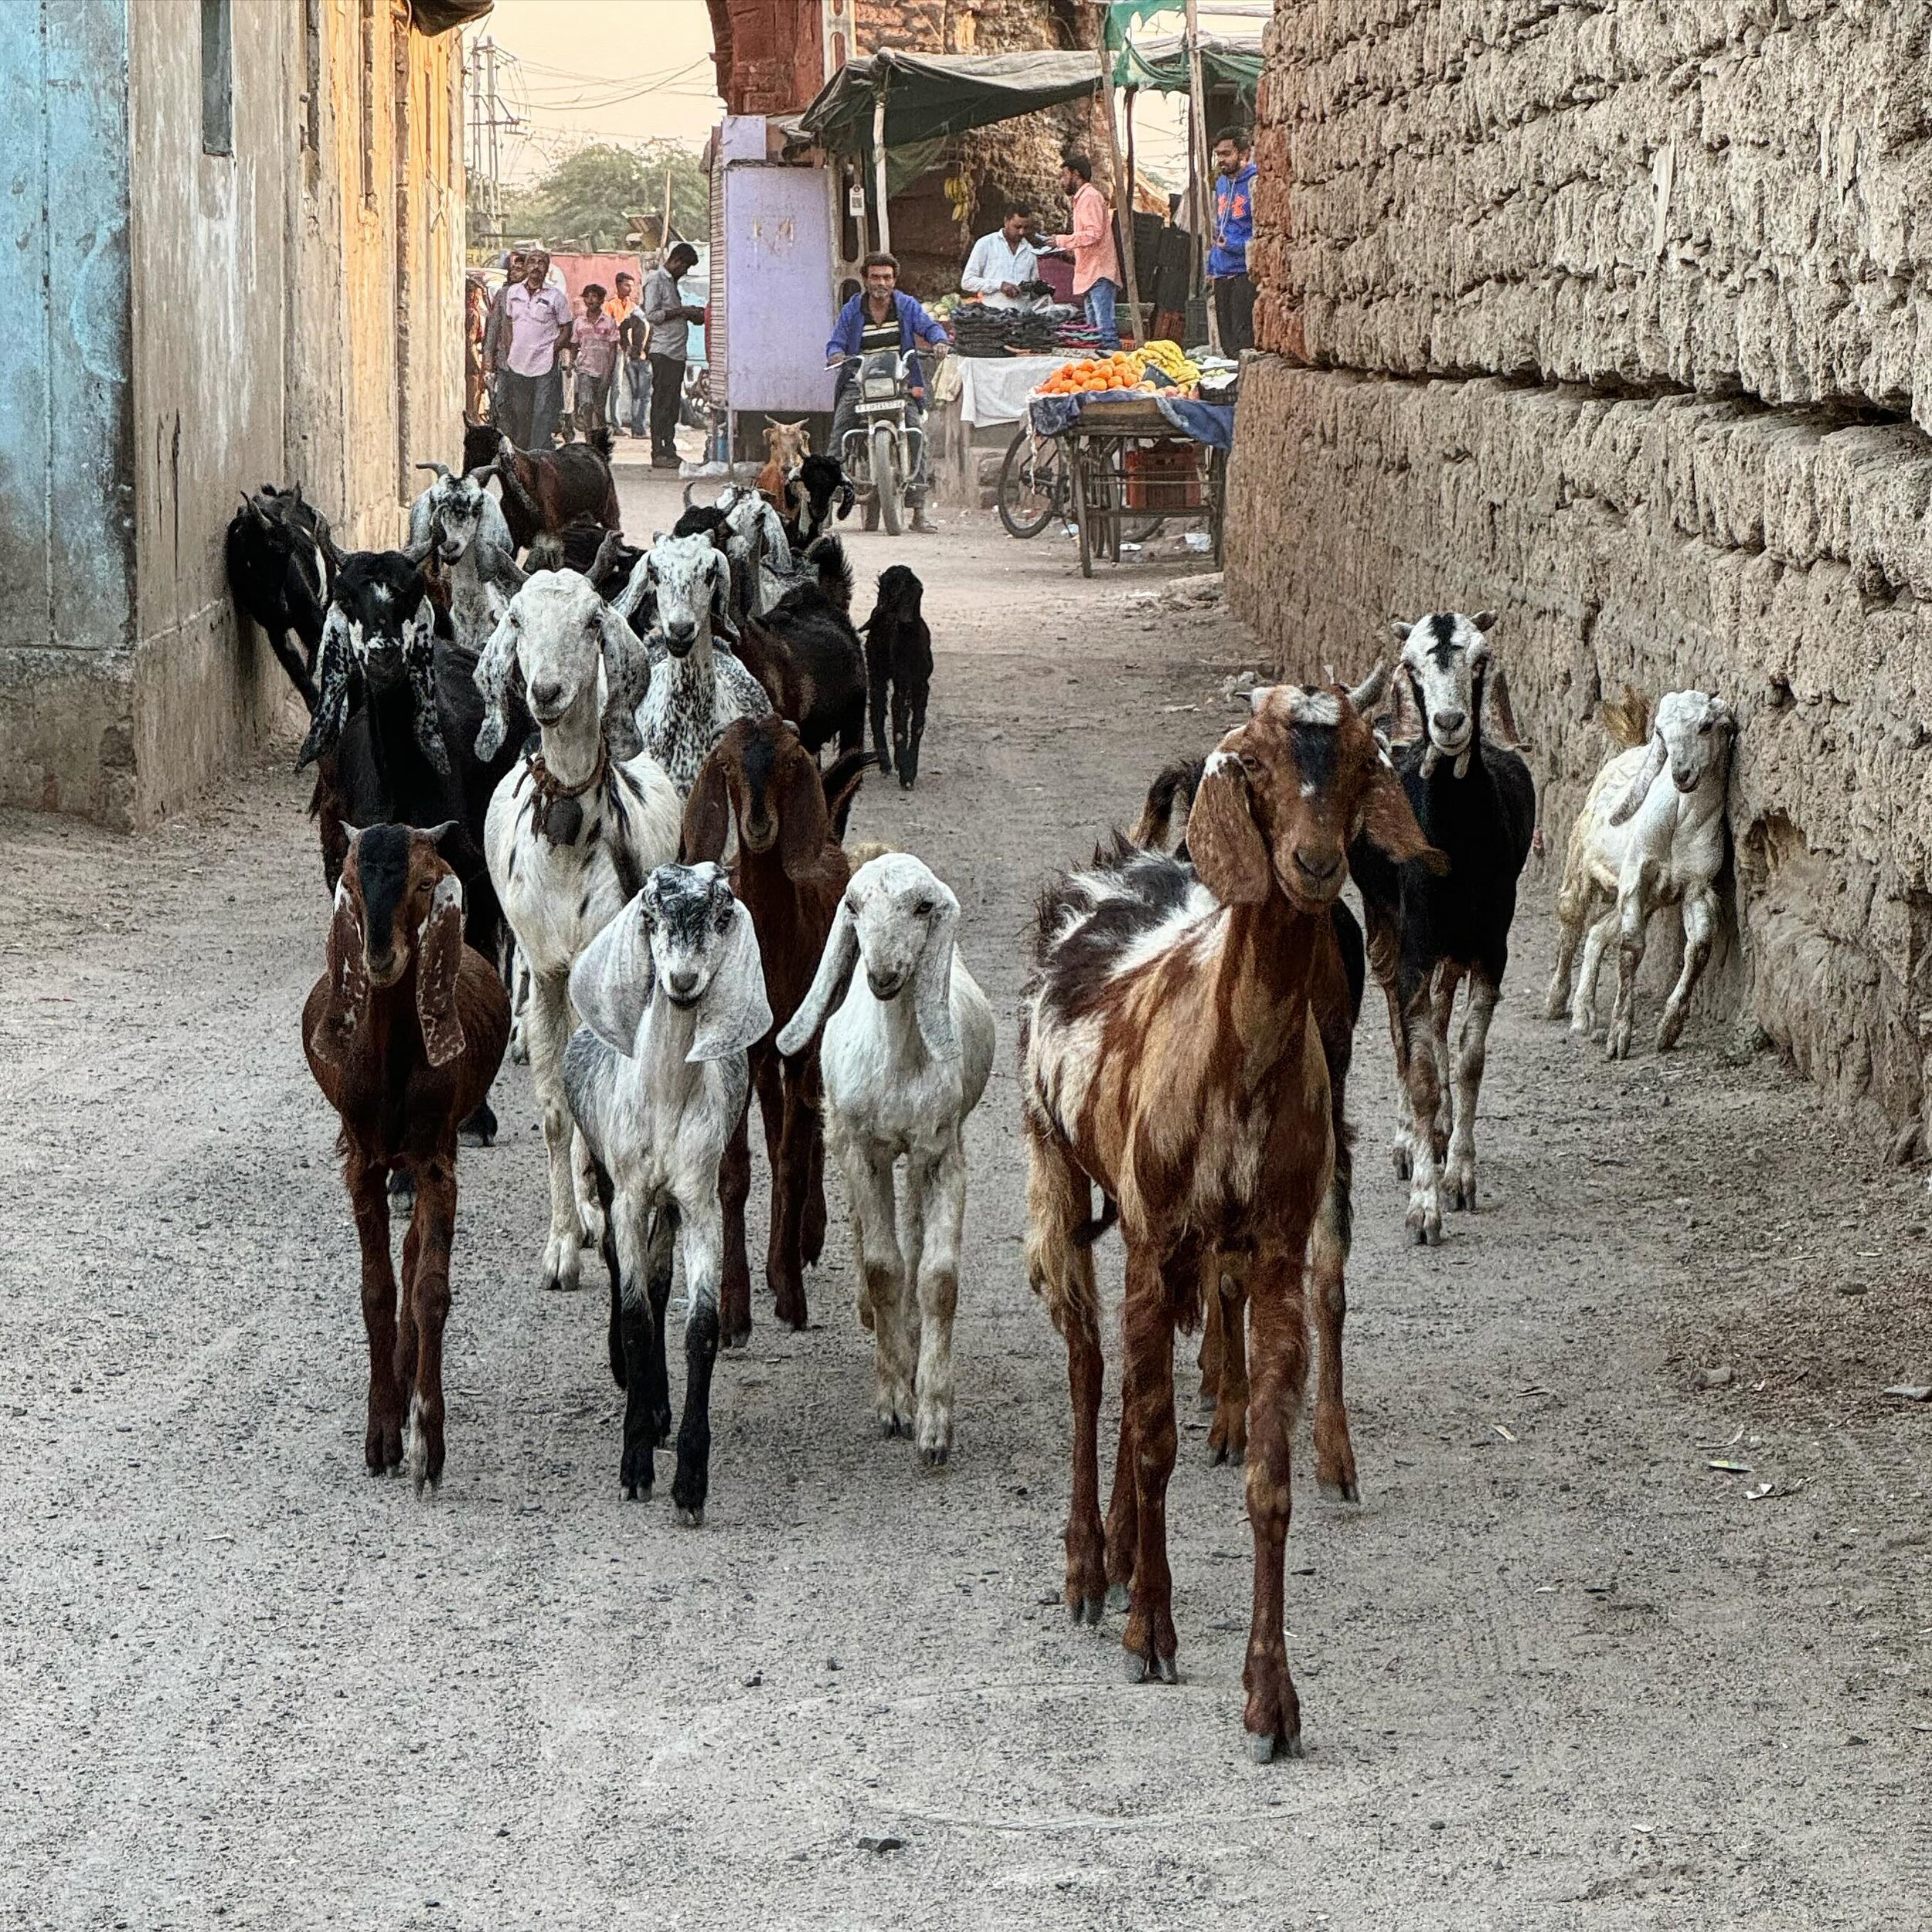 Actually one of the best moments I enjoy being on trips is seeing (and sometimes lucky enough to be touching) animals of different kinds. These long-ear goats are truly lovely and elegant 💕 as they return to Mundra from a day of excursion! 
#goats #